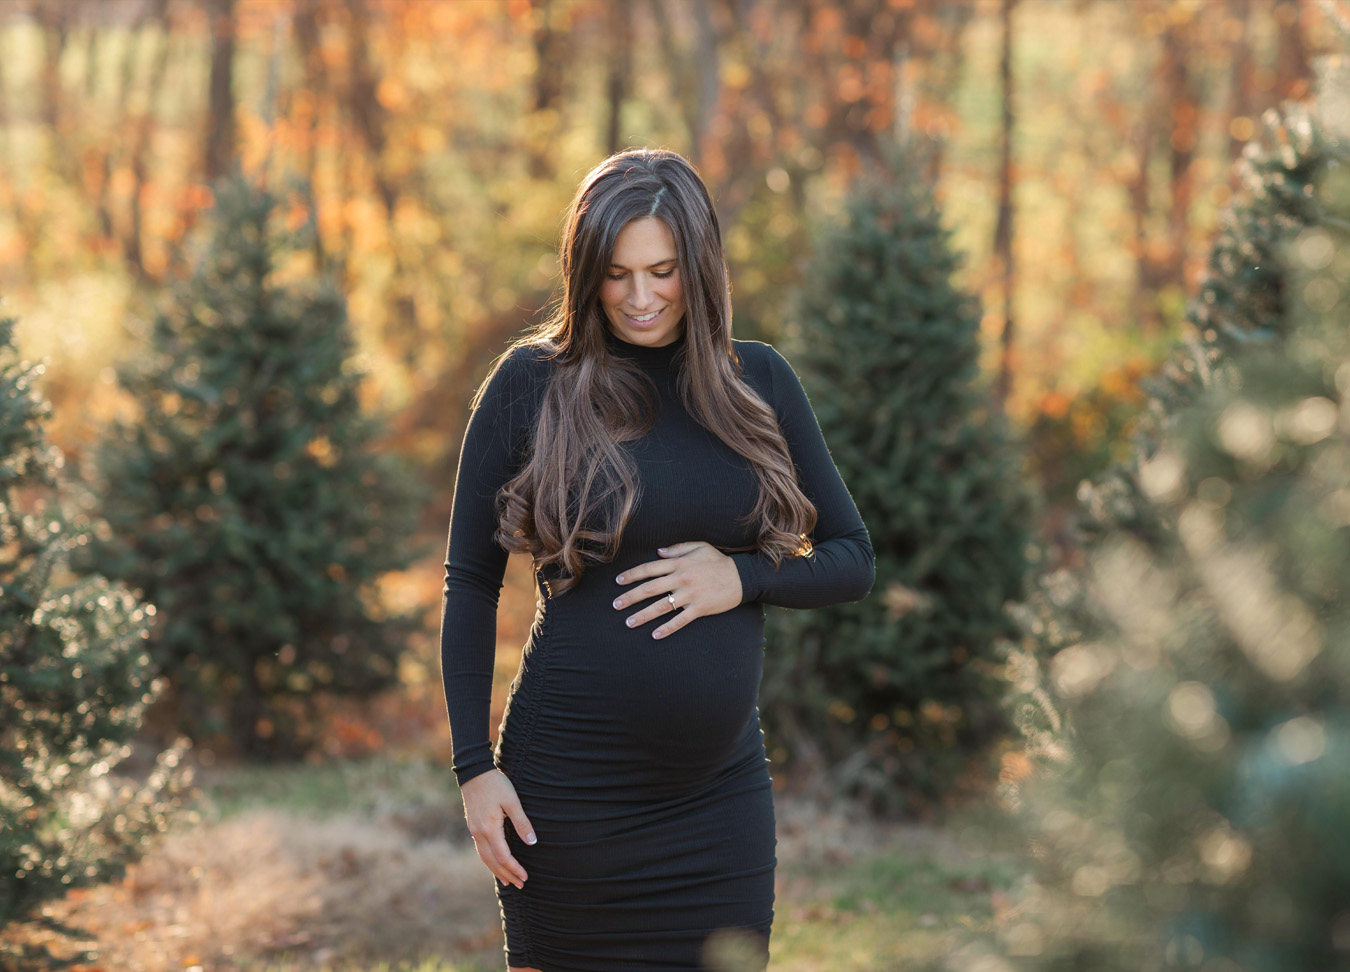 Christmas Maternity Photoshoot in Northern Virginia featuring a mom wearing a black dress and holding her belly